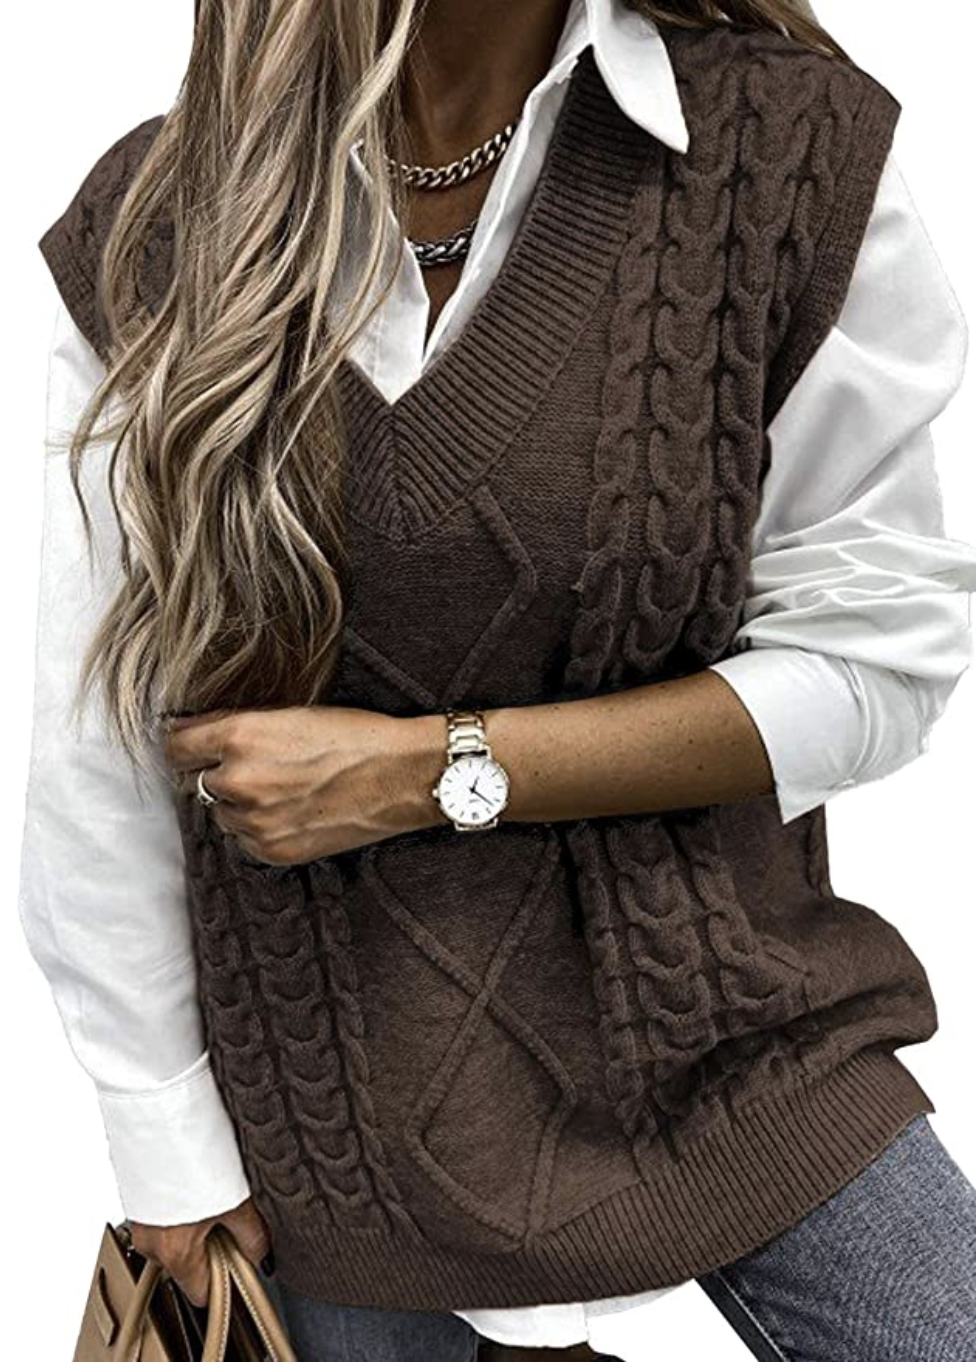 Hotapei Bestselling Sweater Vest Is an Instant Wardrobe Staple | Us Weekly